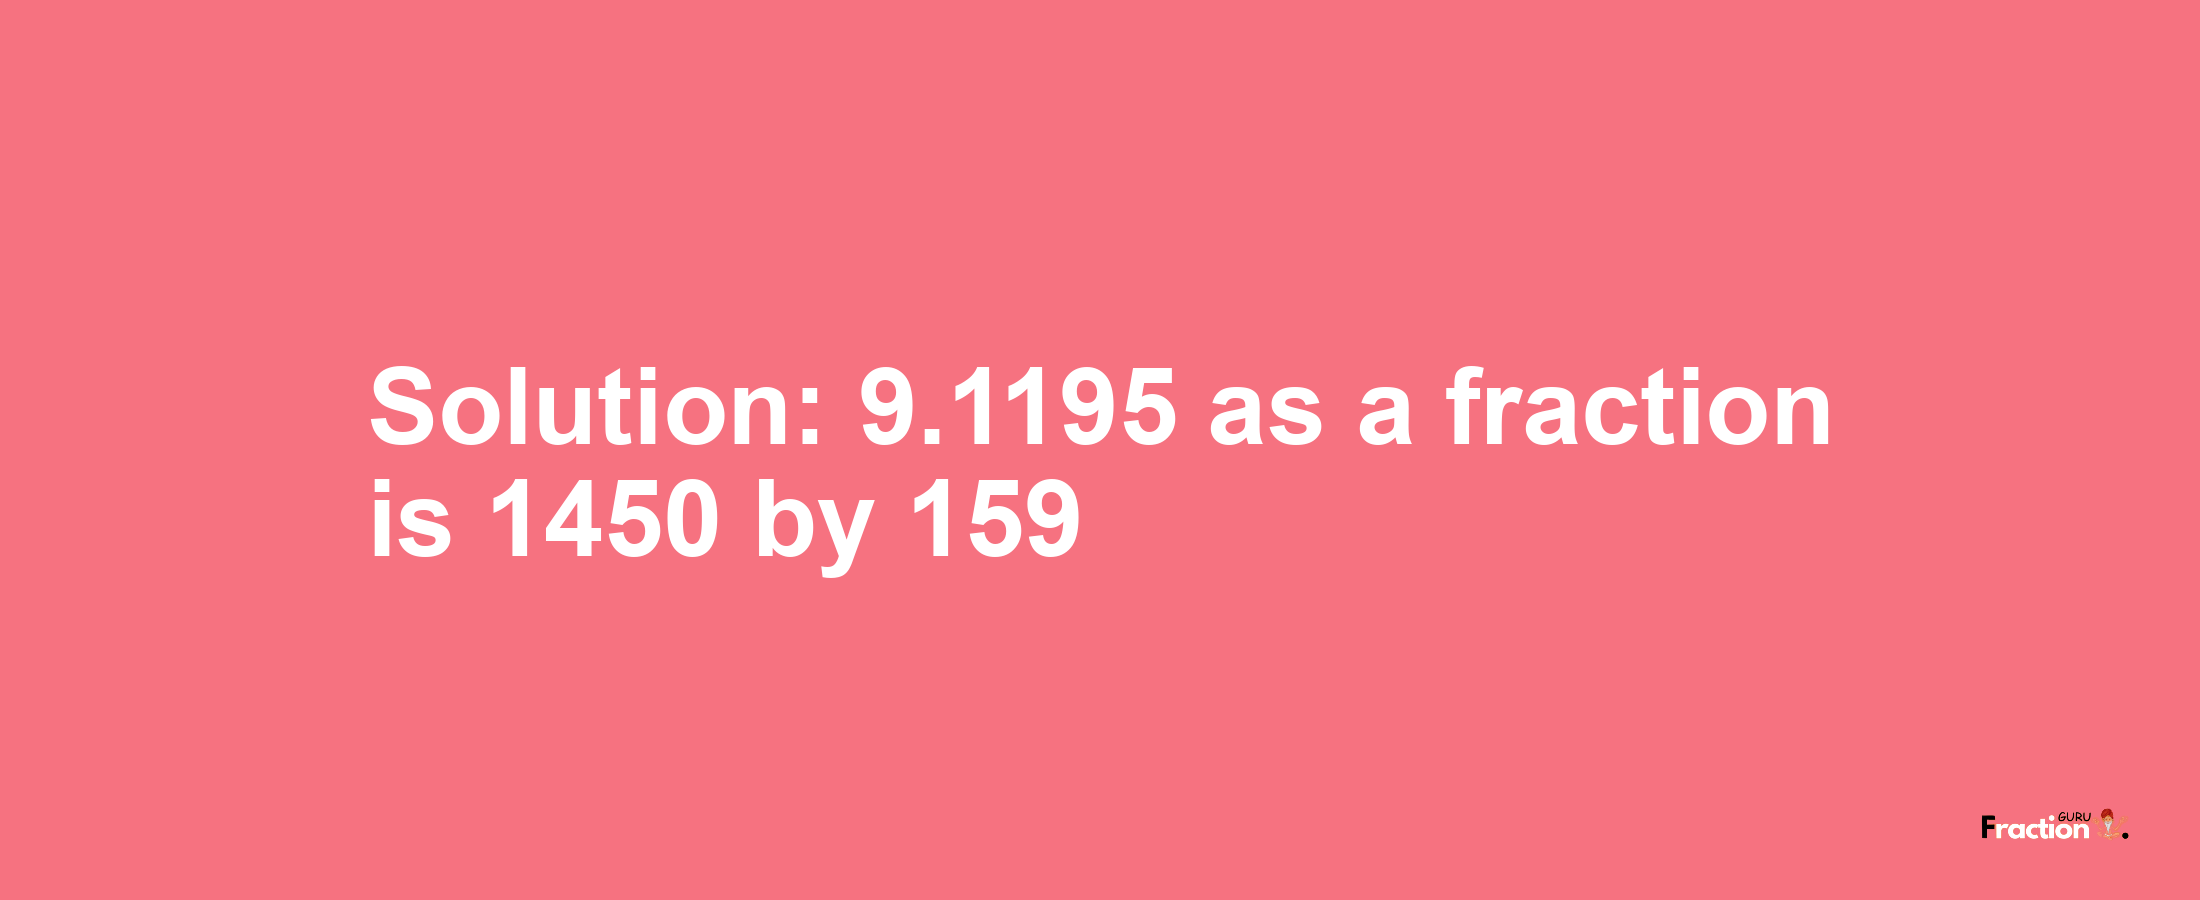 Solution:9.1195 as a fraction is 1450/159